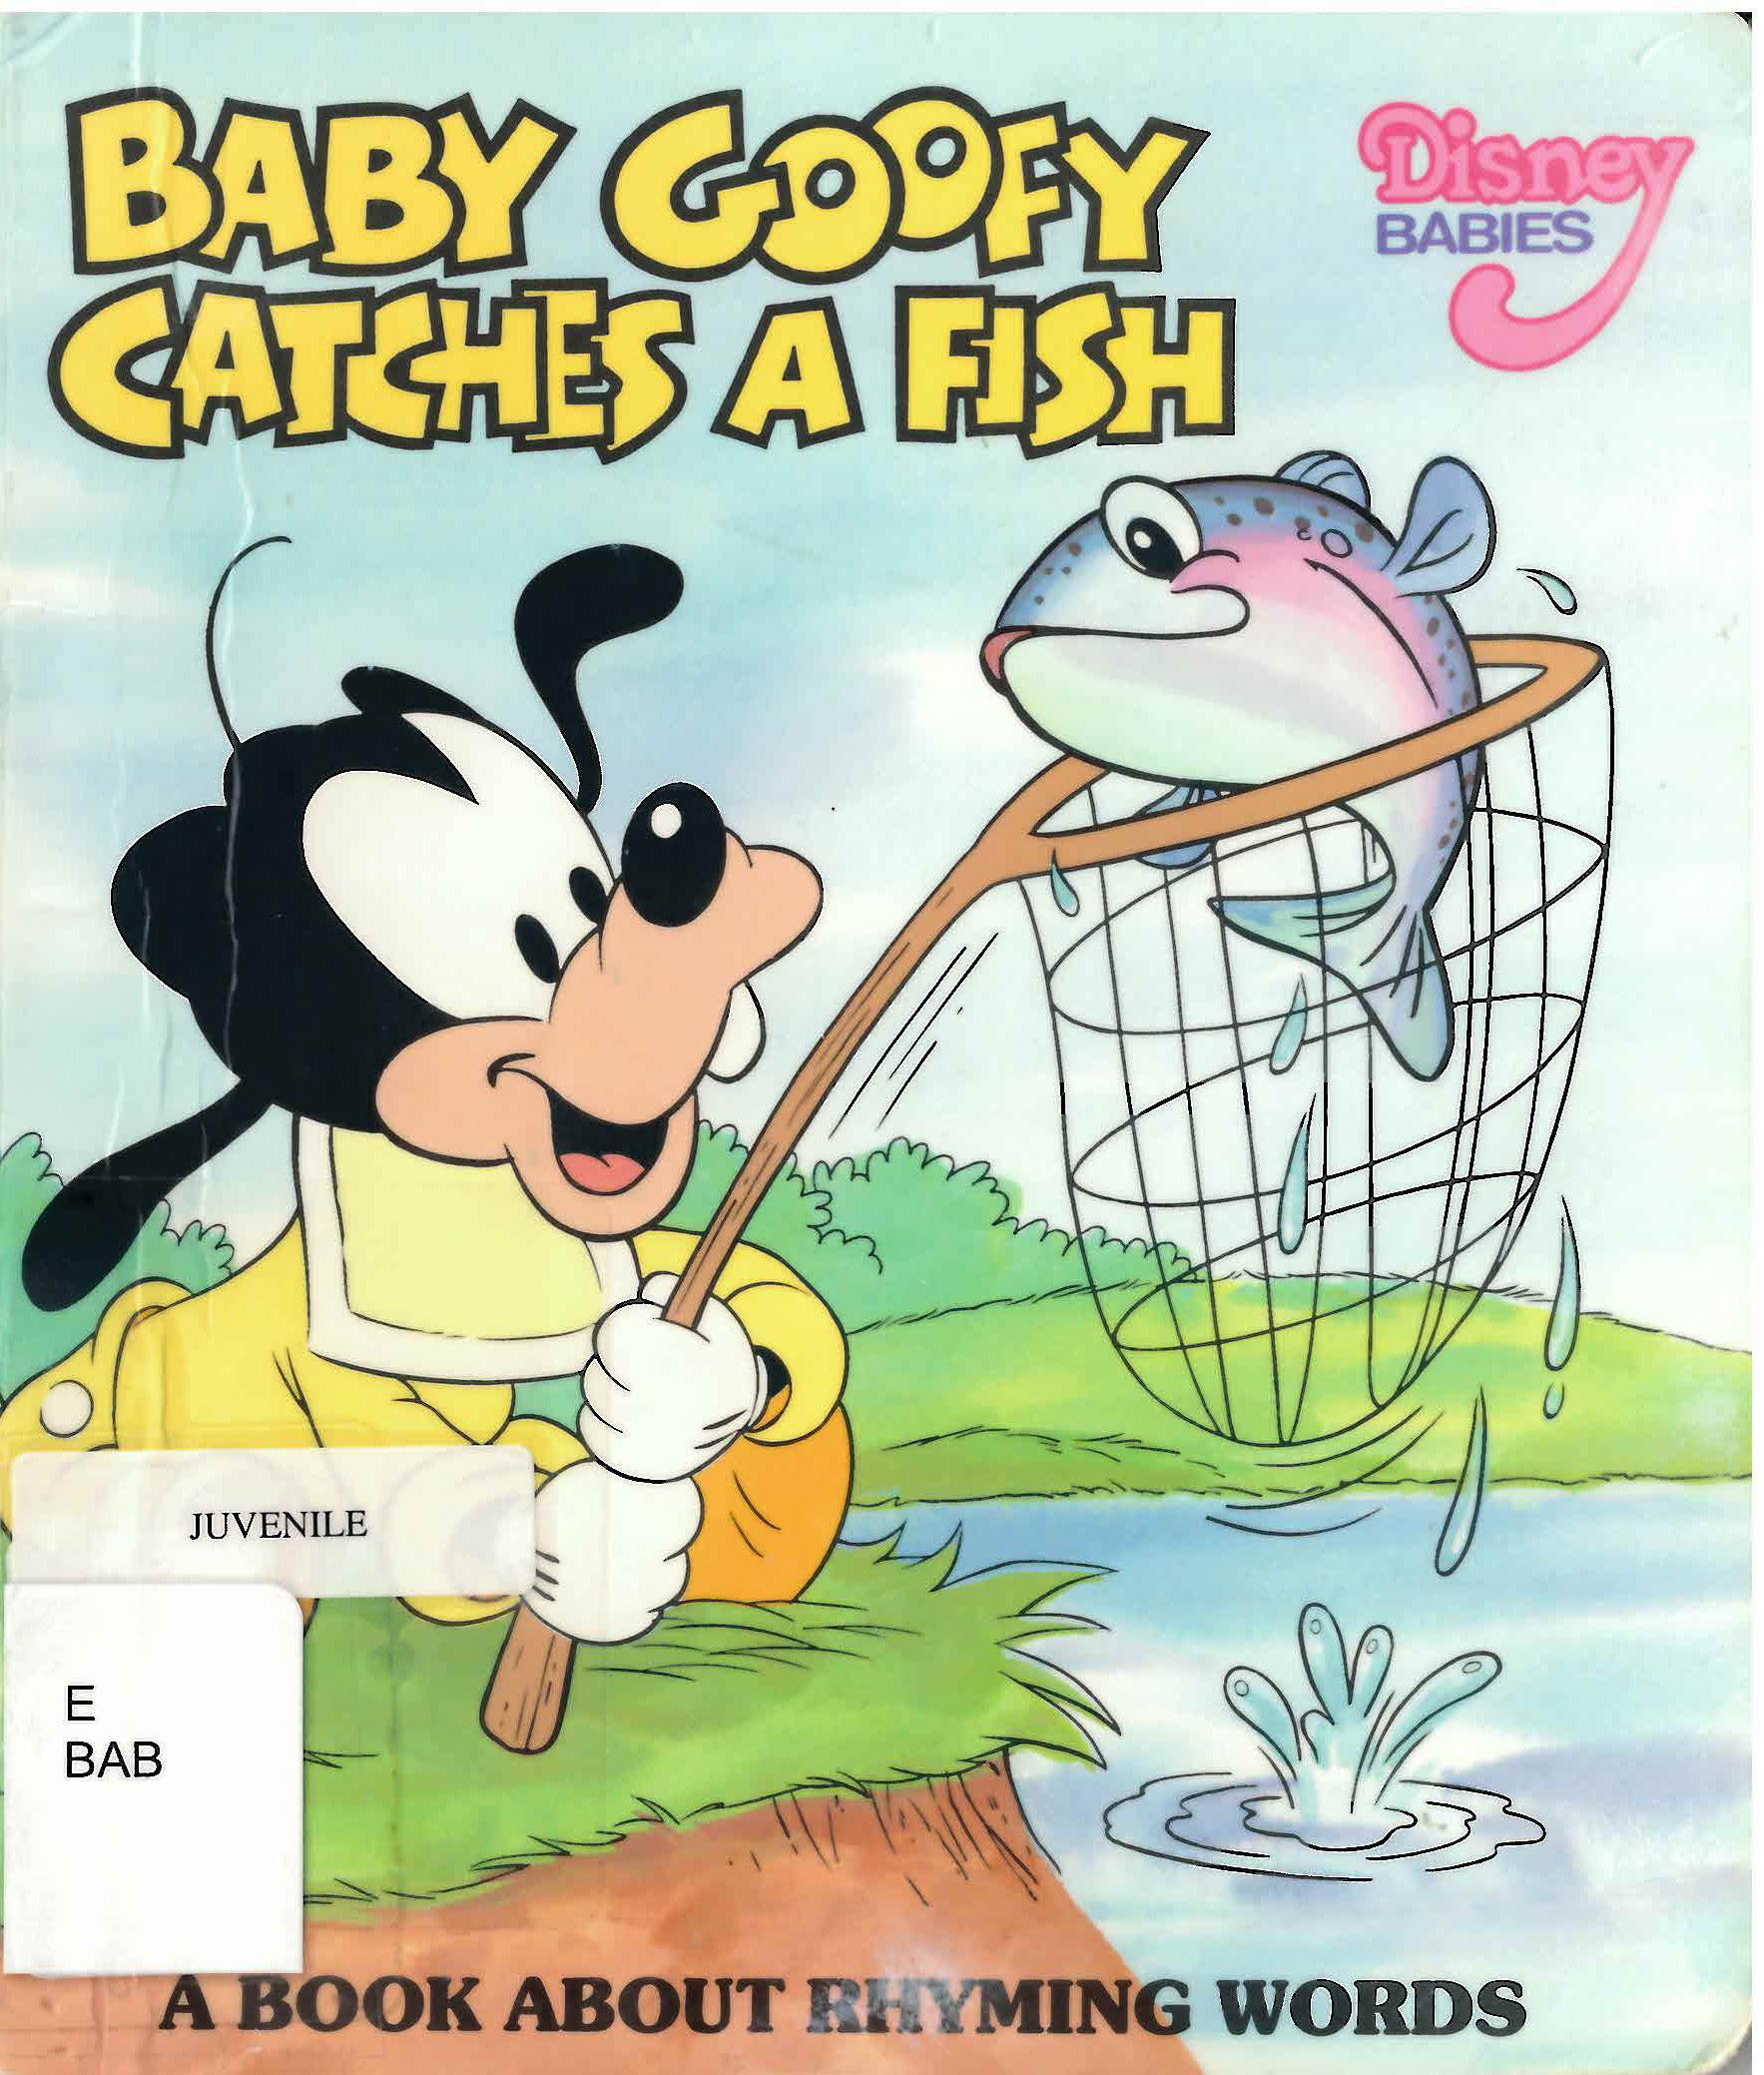 Baby Goofy catches a fish: a book about rhyming words.